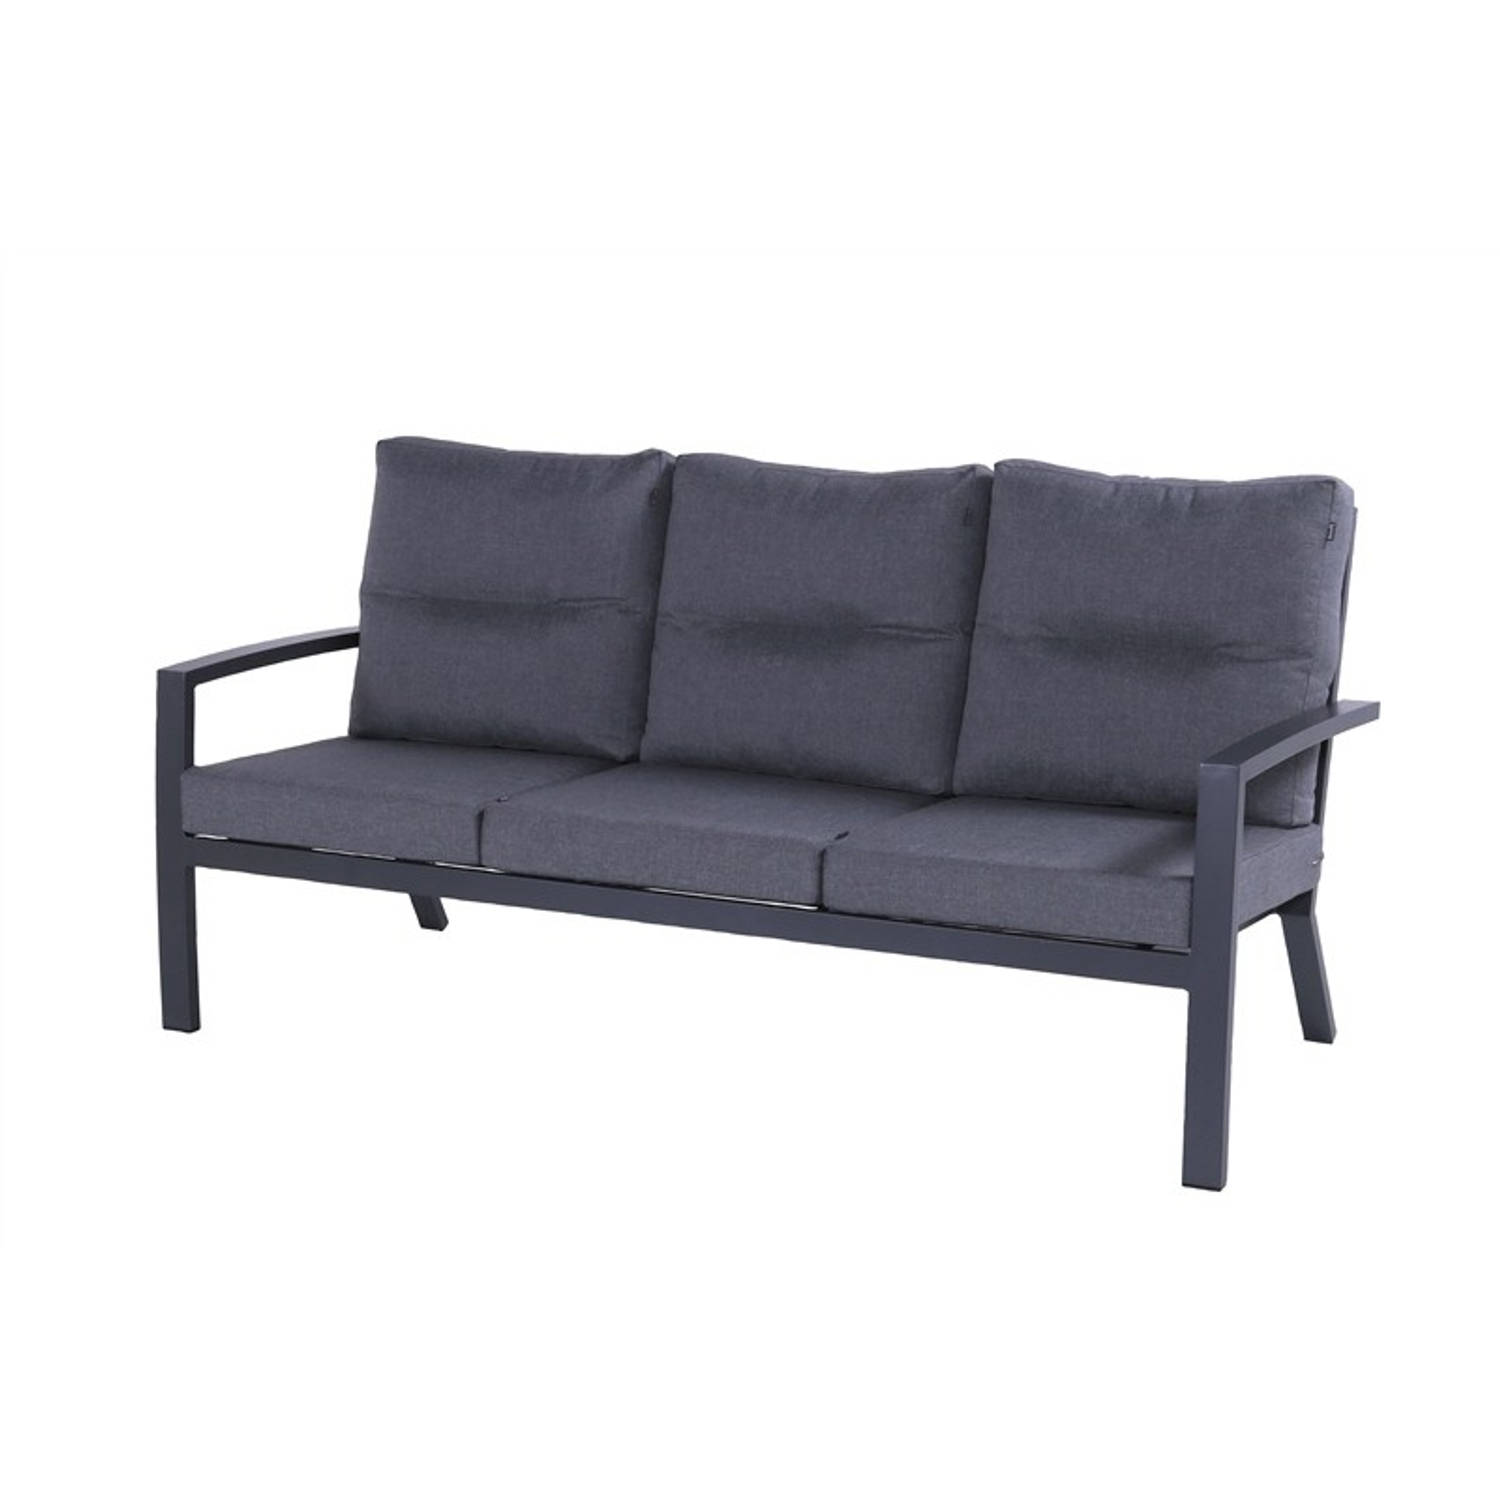 Canberra lounge sofa 3-seater